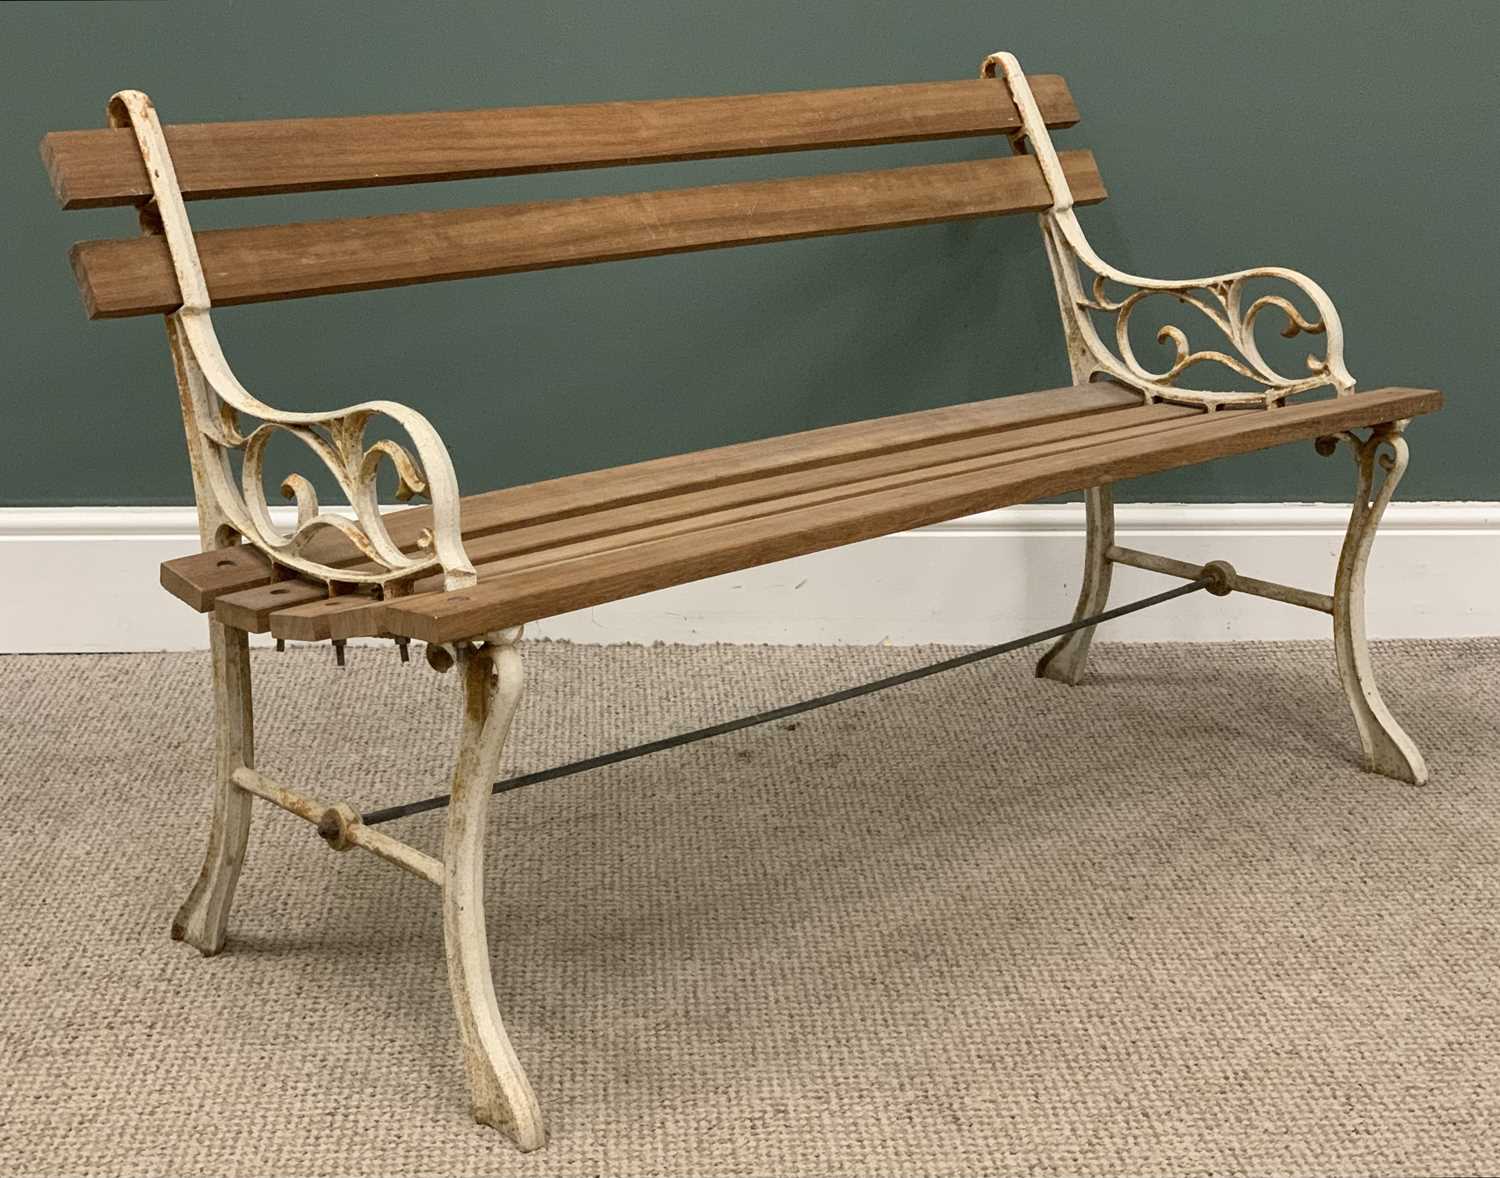 GARDEN BENCH with slatted wooden planks and cast ends, 69 (h) x 122 (w) x 56 (d) cms Provenance: - Image 3 of 3